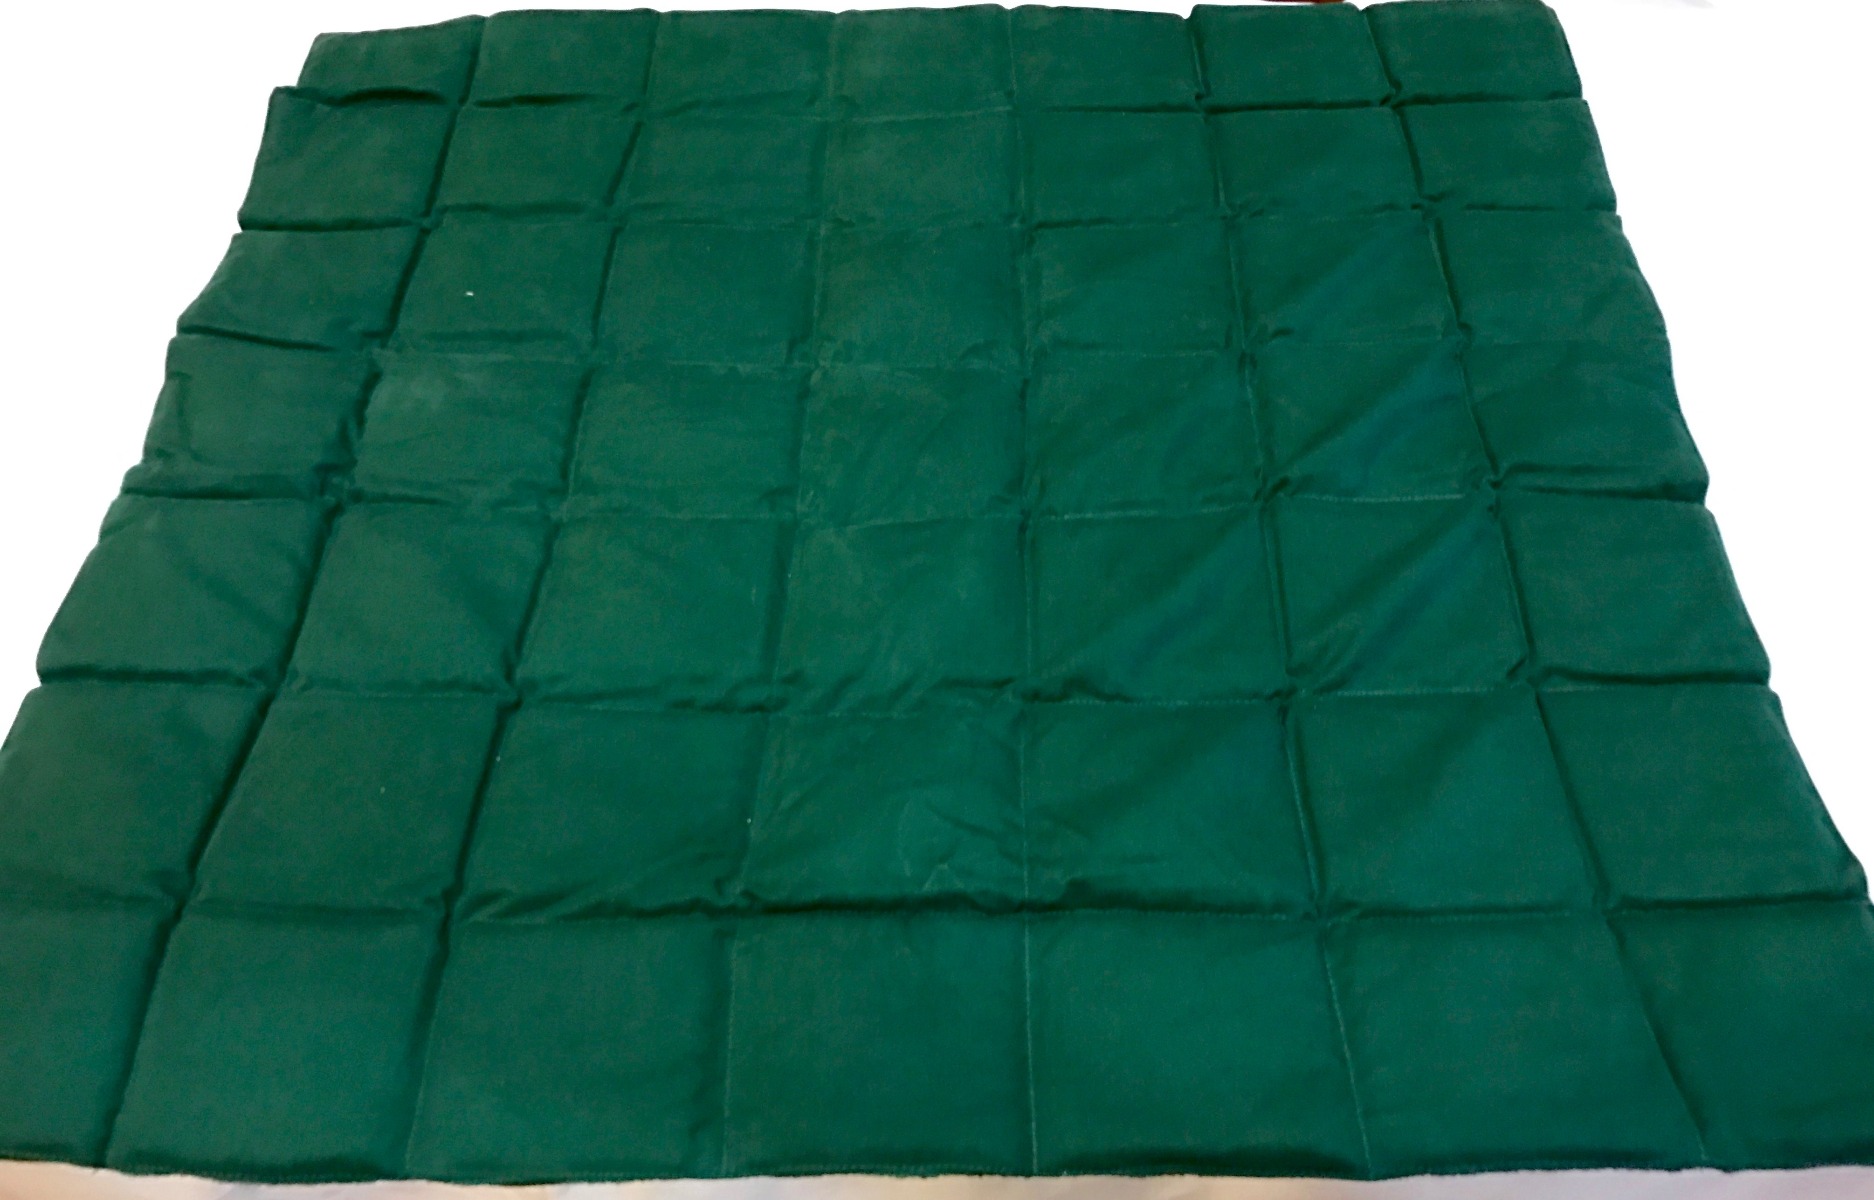 Weighted Lap Pad Large